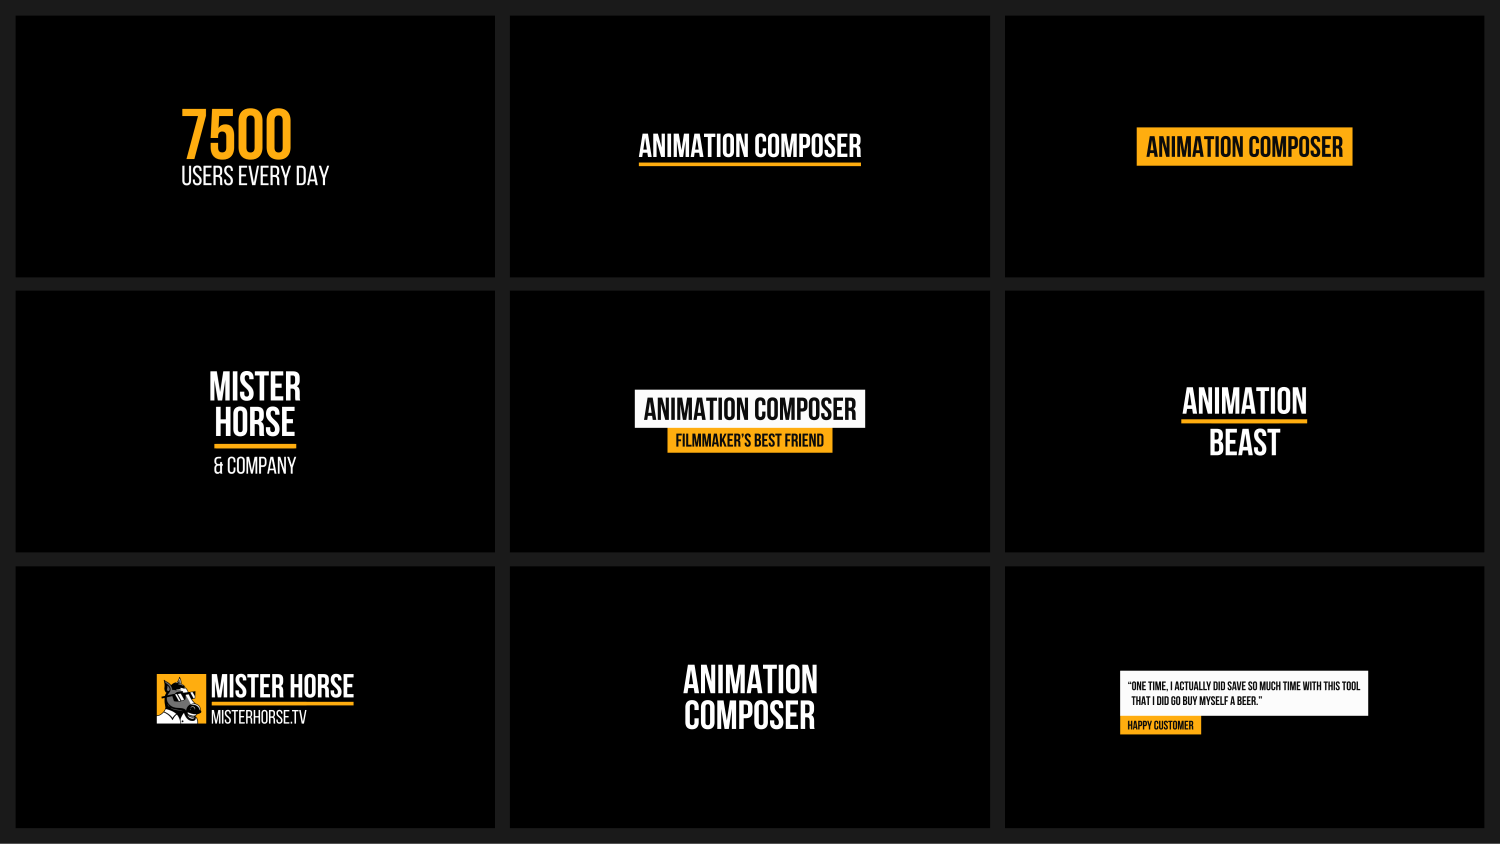 Titles & Lower Thirds for Animation Composer - Mister Horse